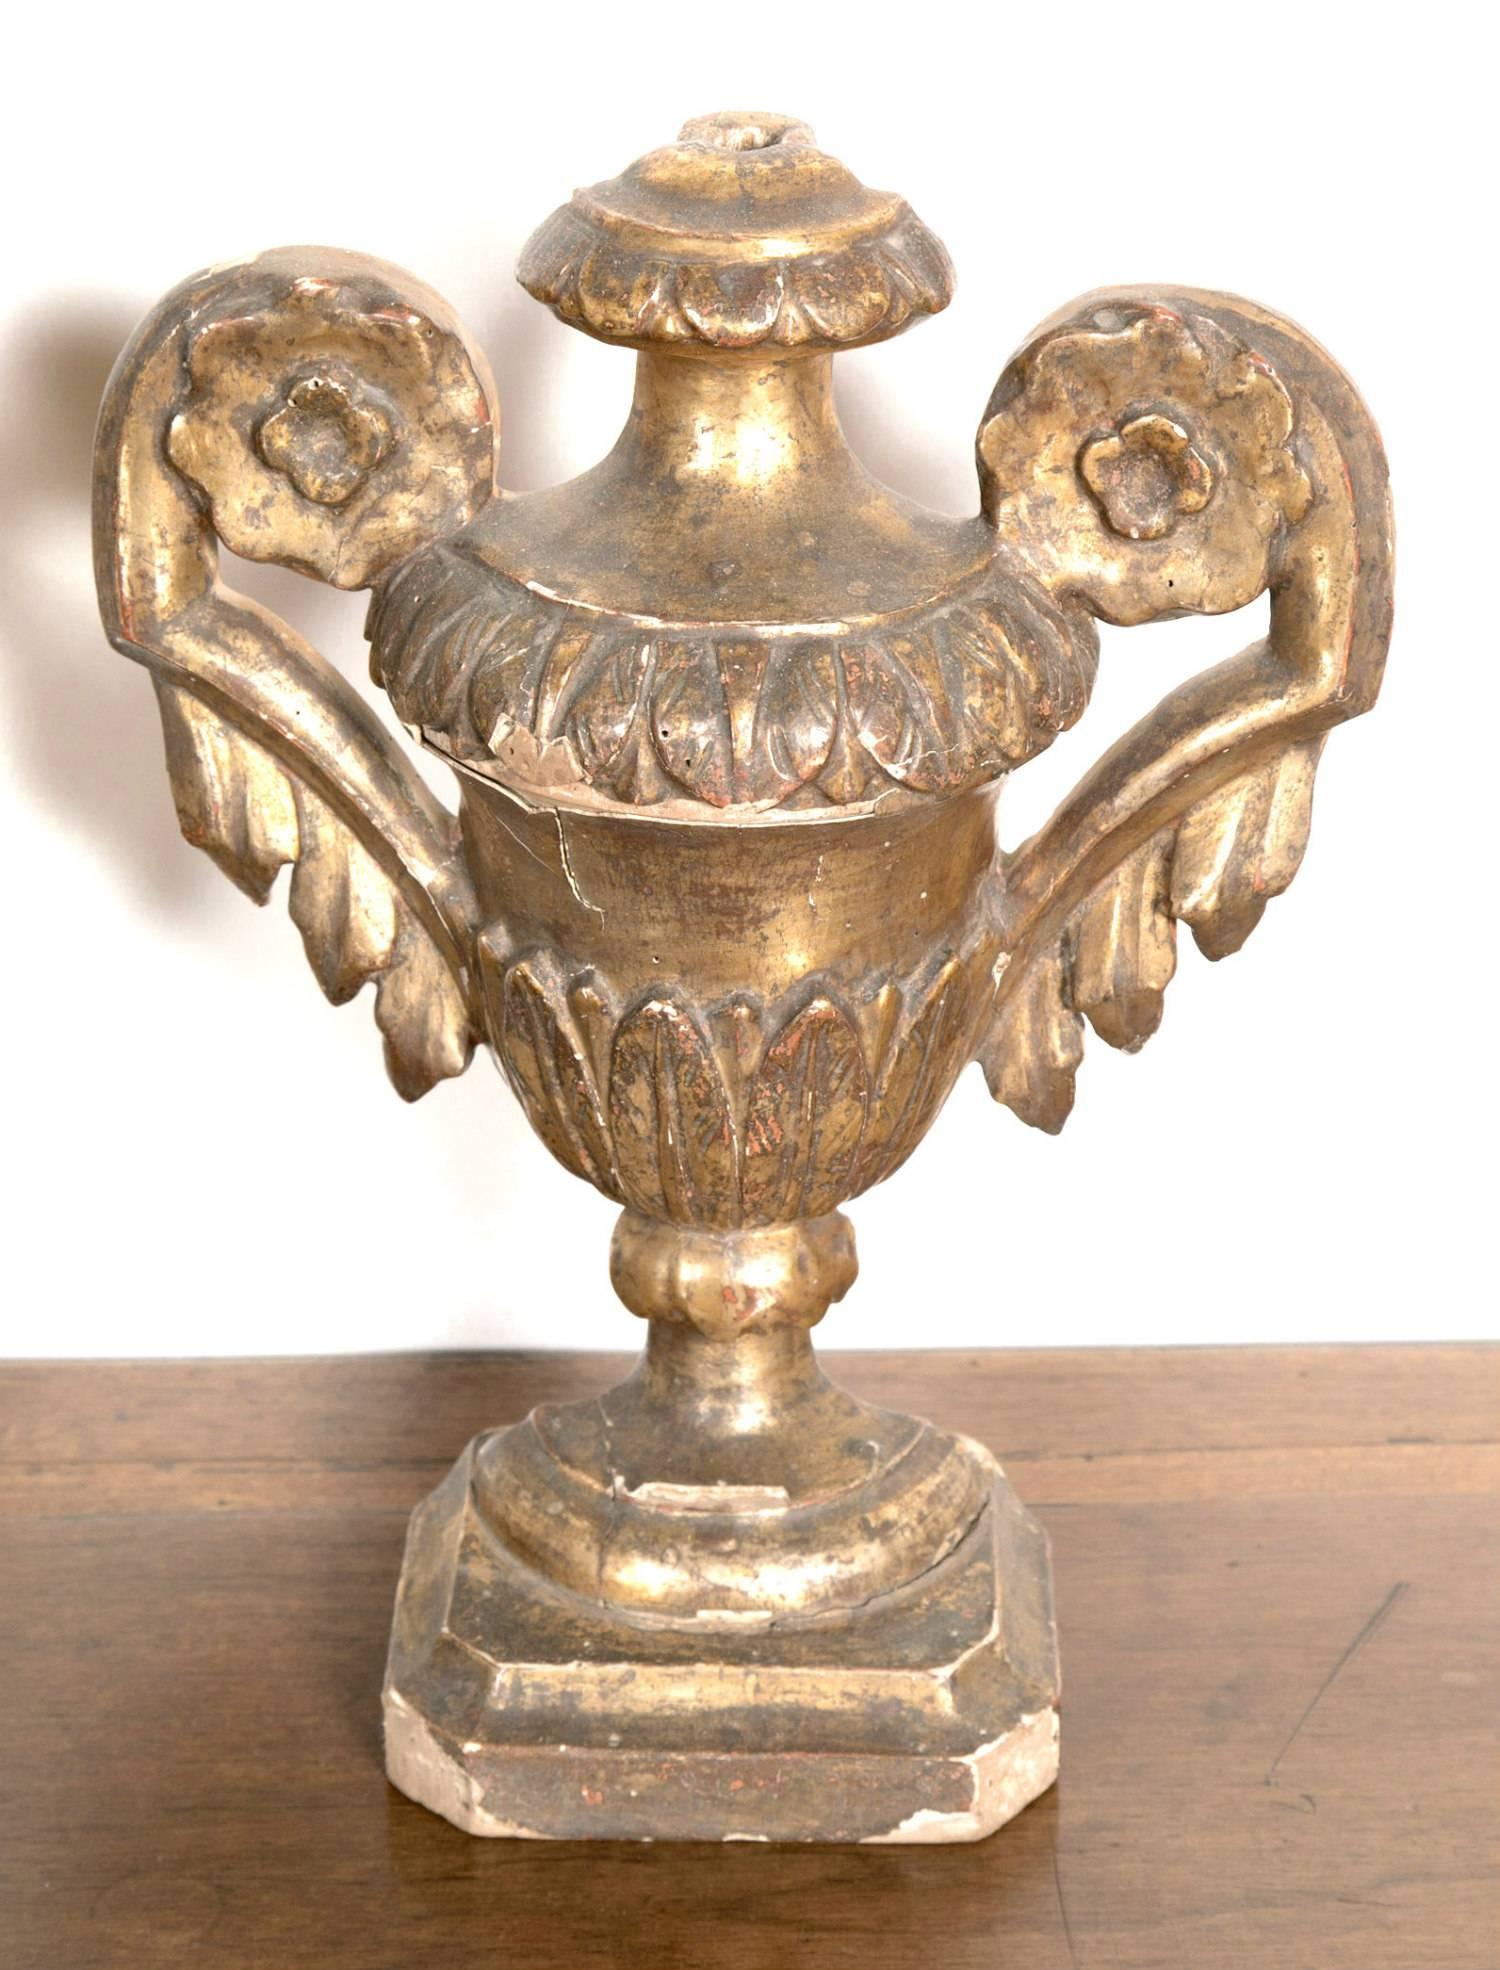 Lovely pair of 19th century hand carved giltwood Tuscan altar urns with elaborate foliate-carved, scrolling handles, raised on a fluted socle, having a round foot on a square base. Each of these Italian urns is crafted as a half with one flat side